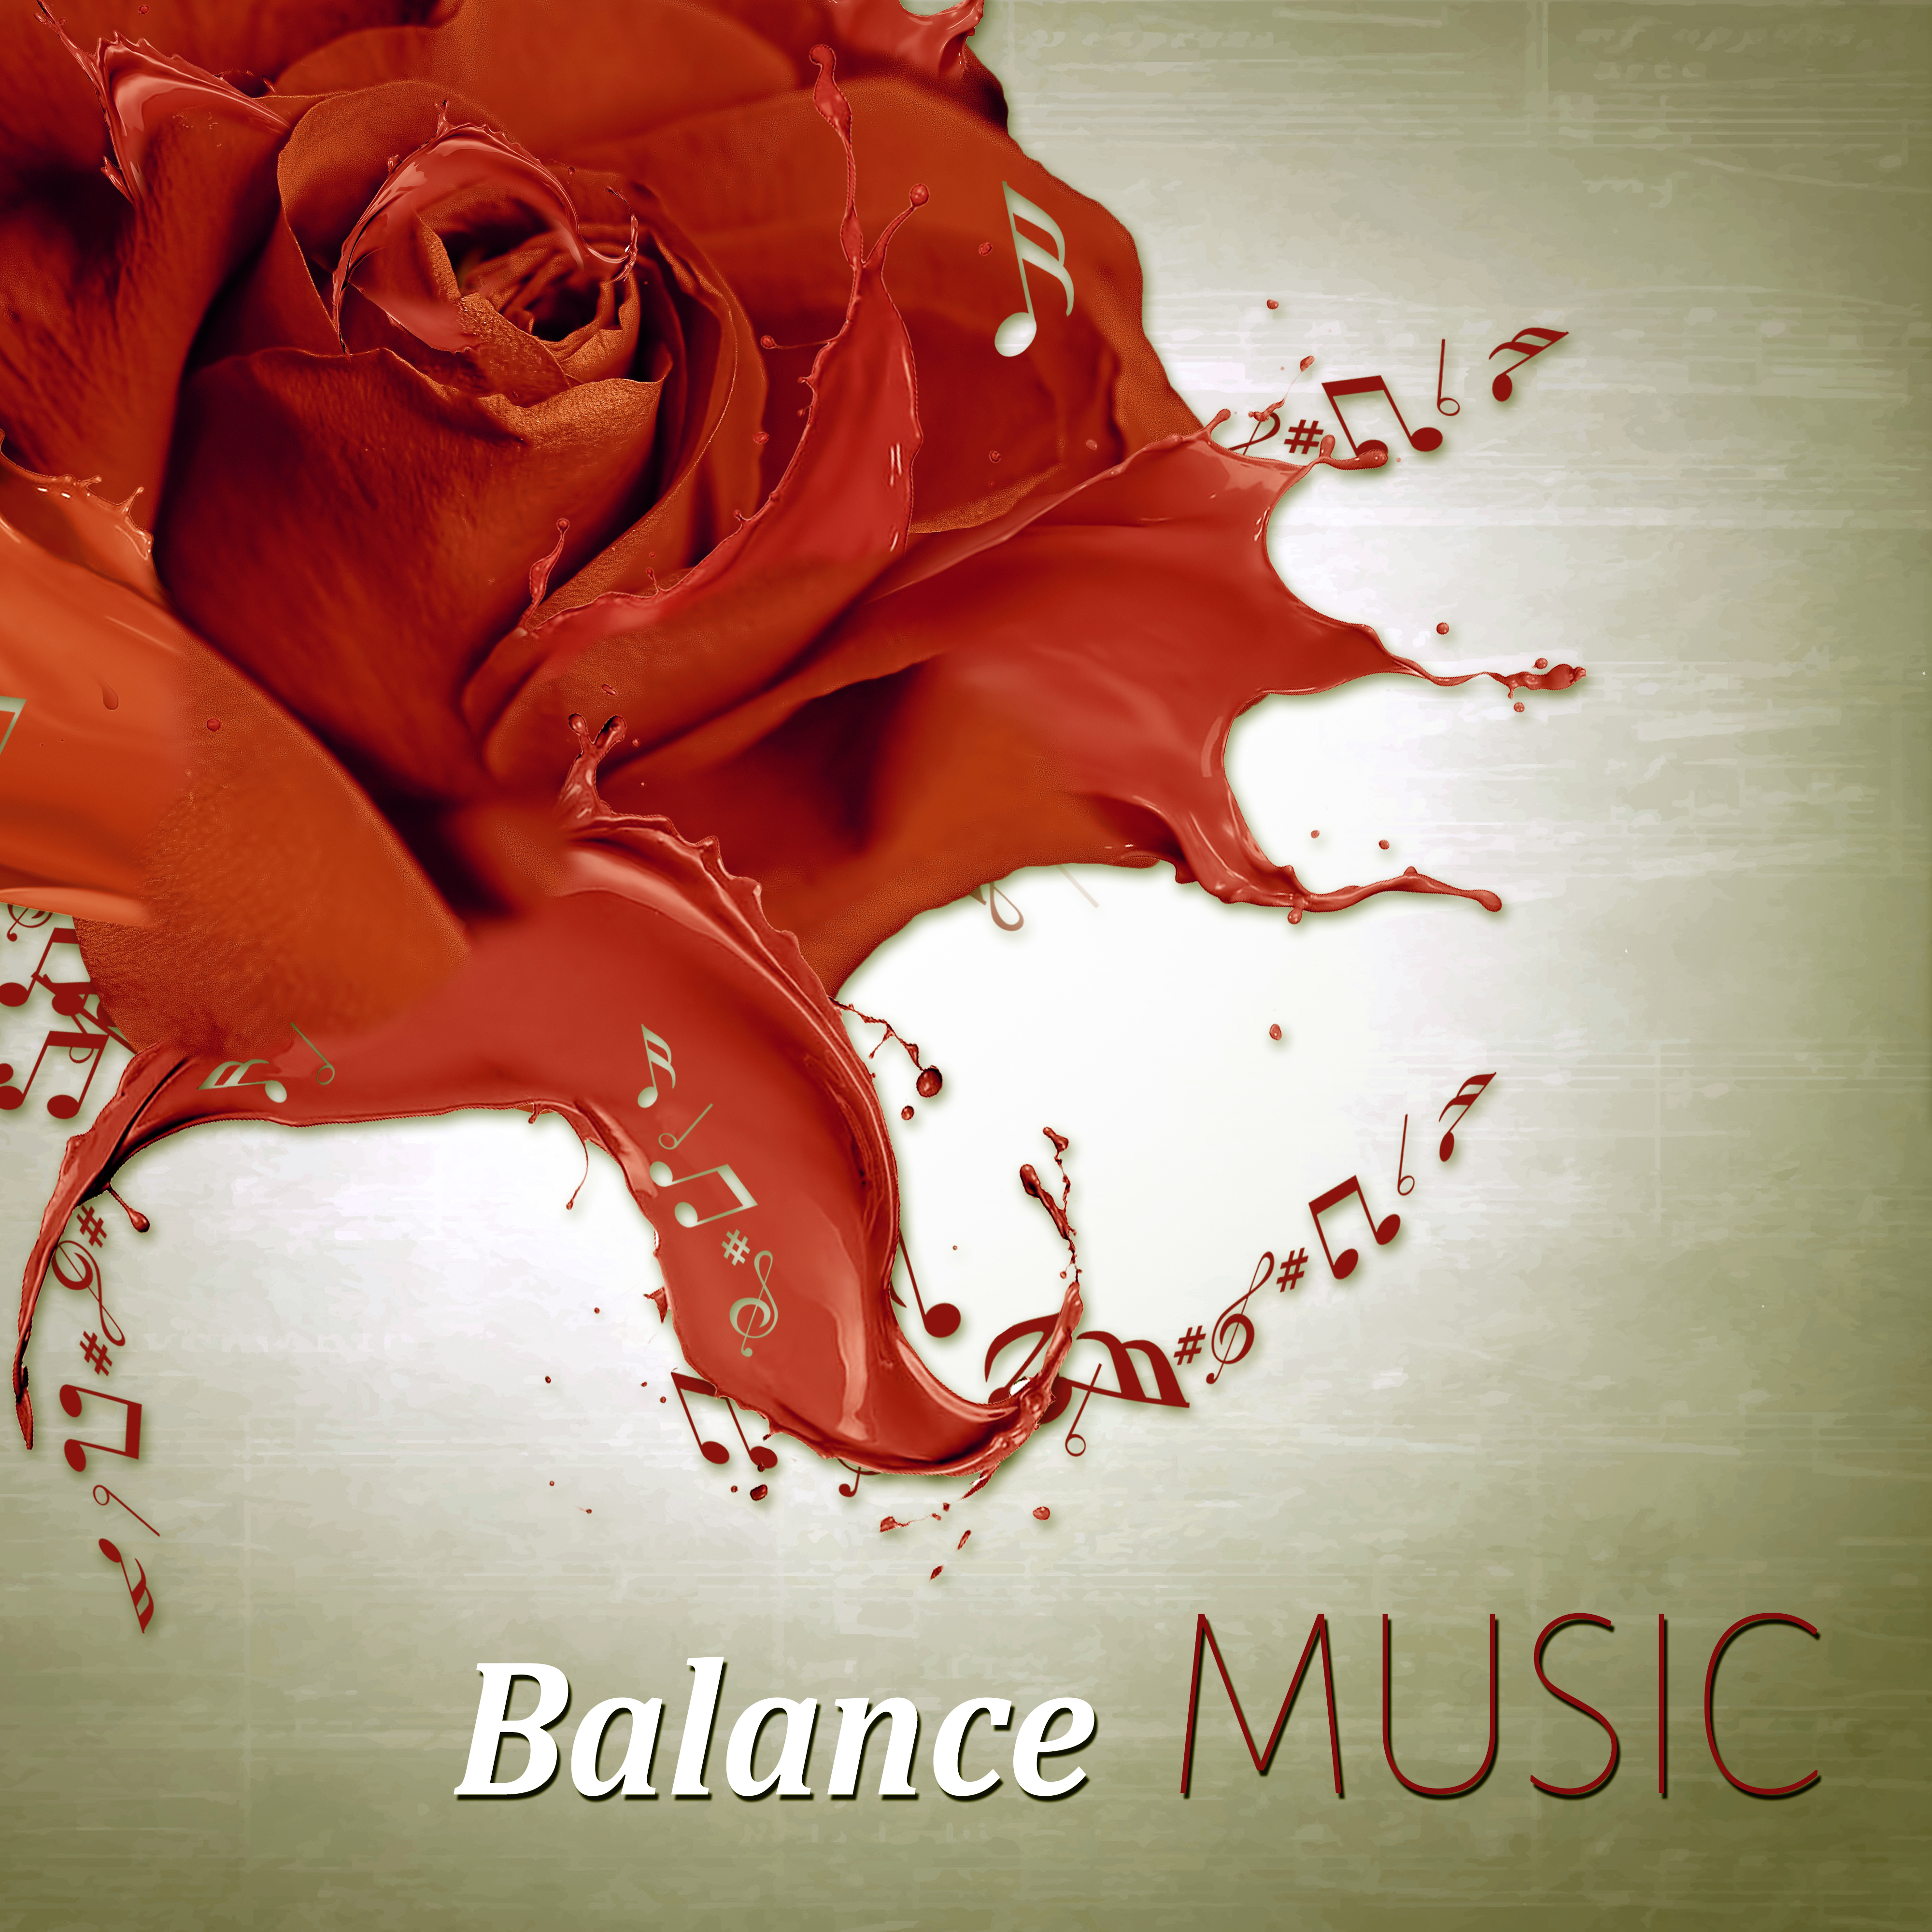 Balance Music - Music for Healing Through Sound and Touch, Time to Spa Music Background for Wellness, Massage Therapy, Mindfulness Meditation, Ocean Waves